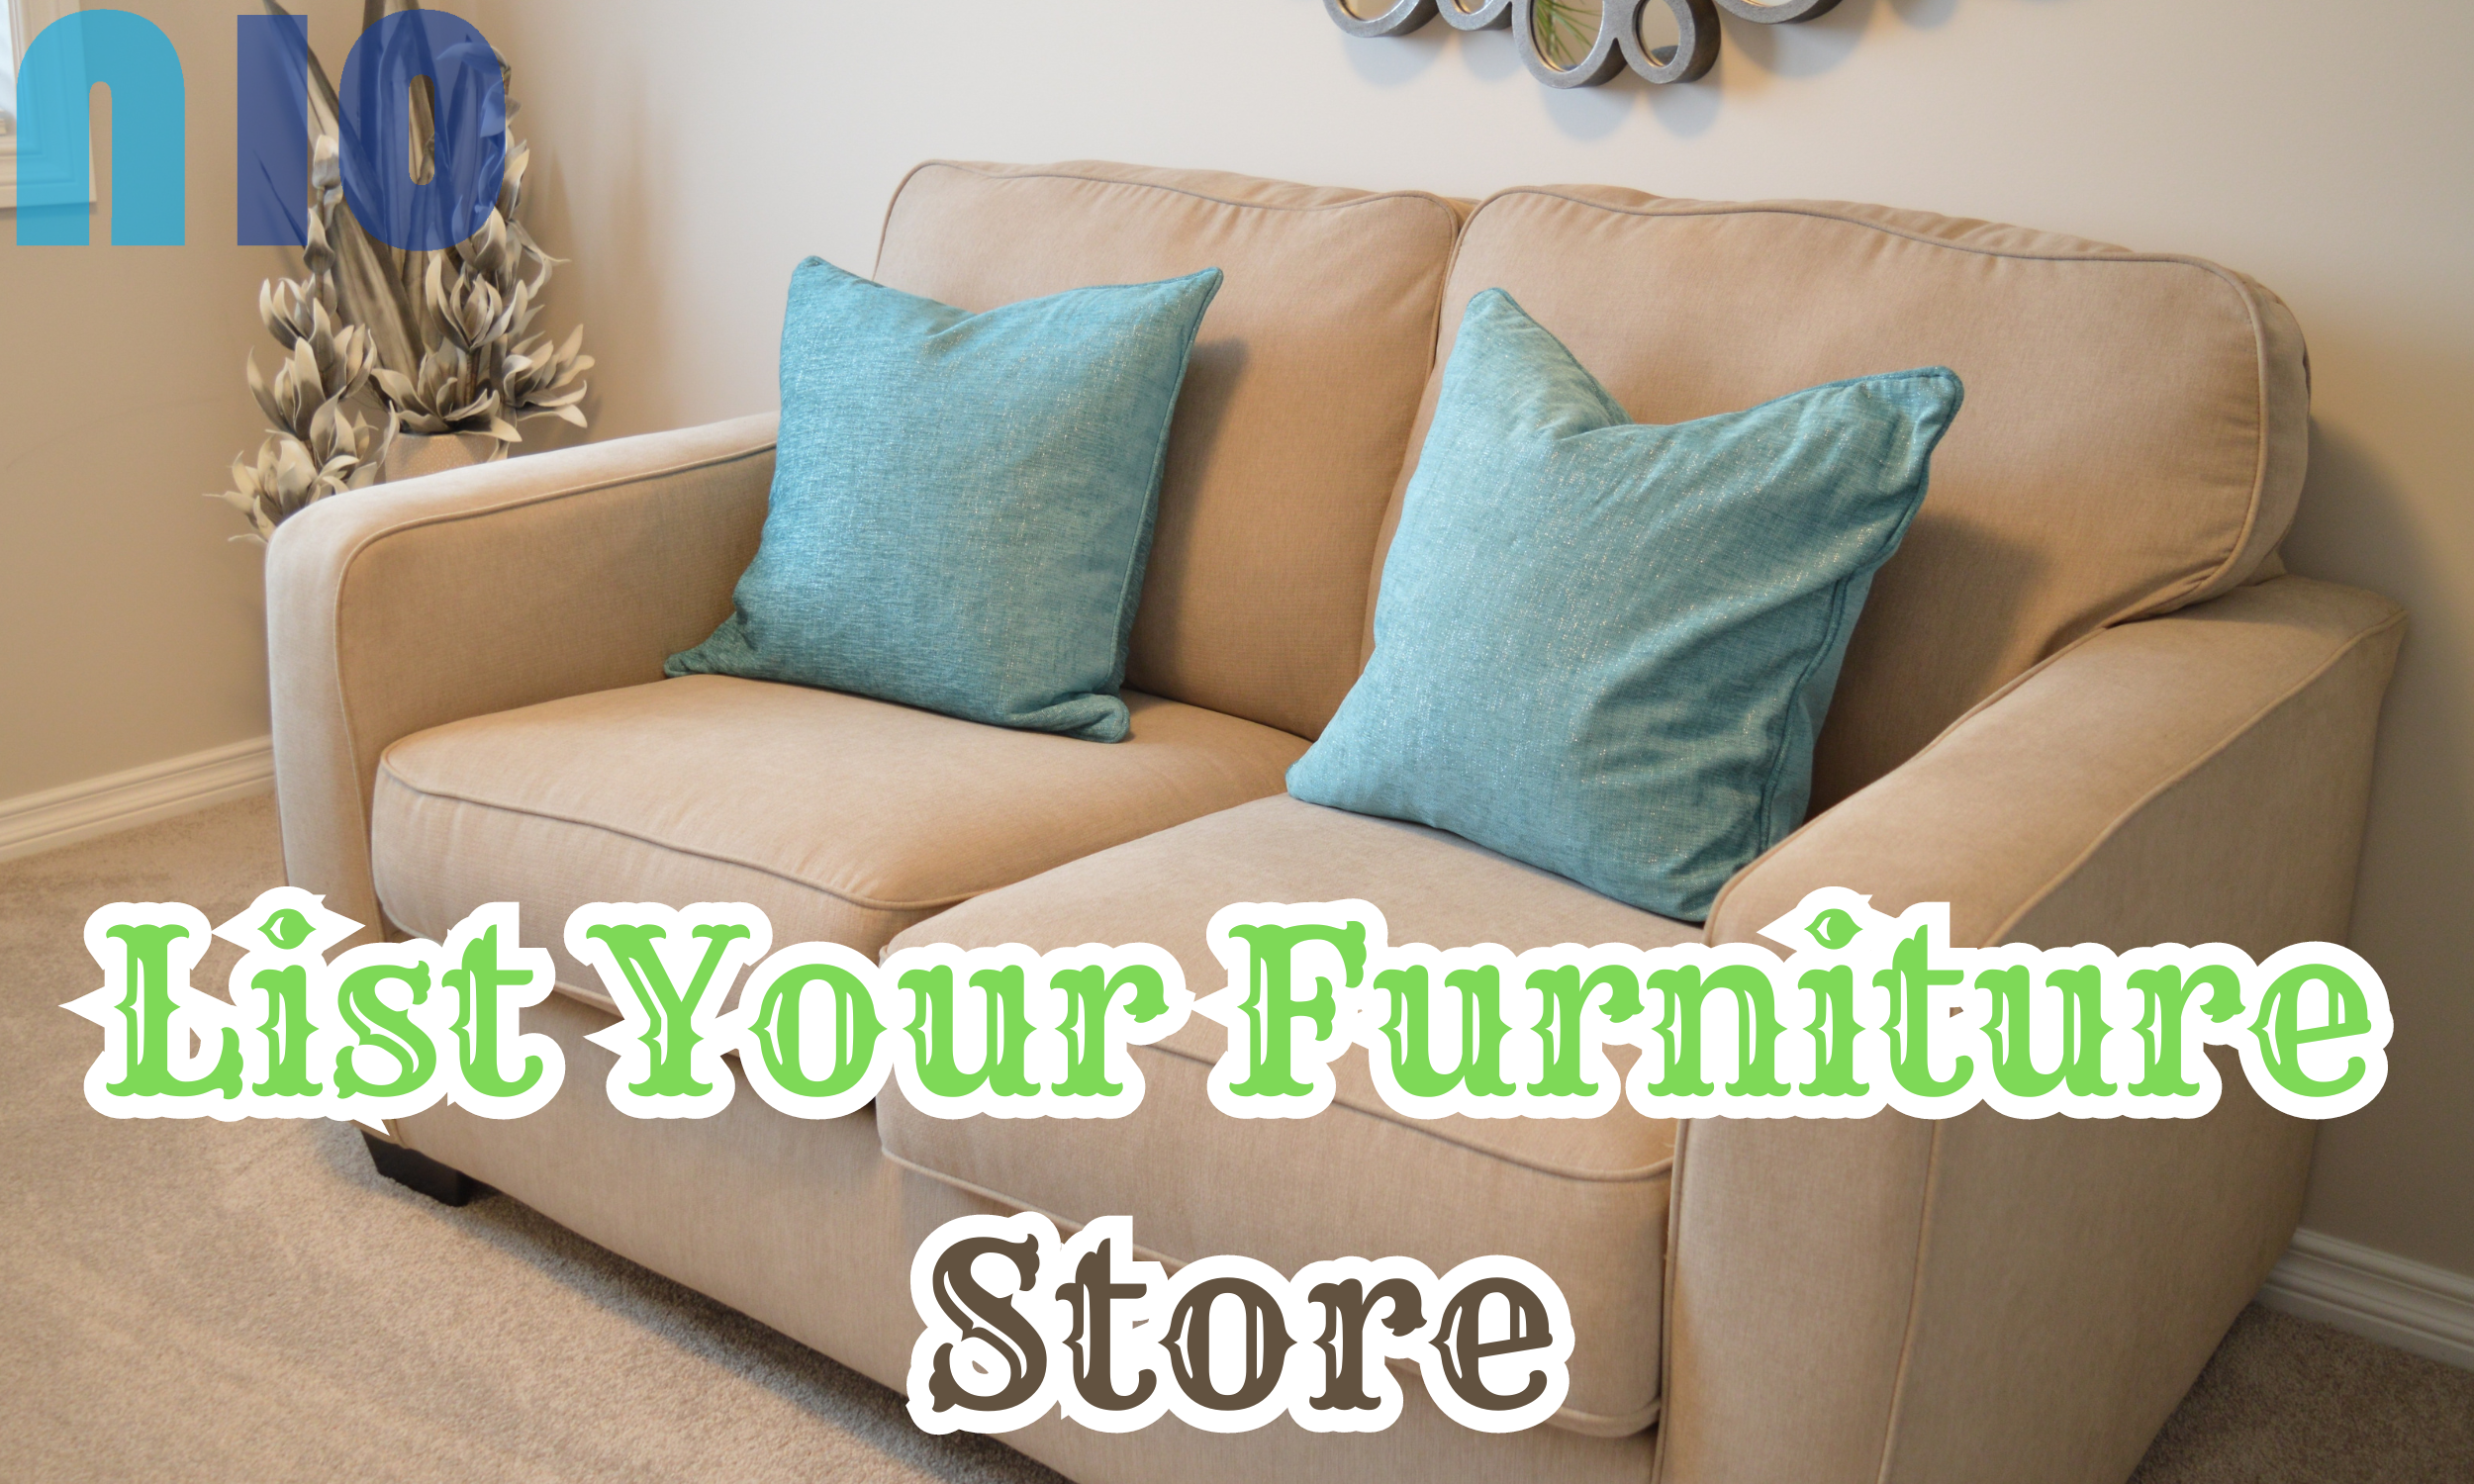  List your Furniture Store In Kota